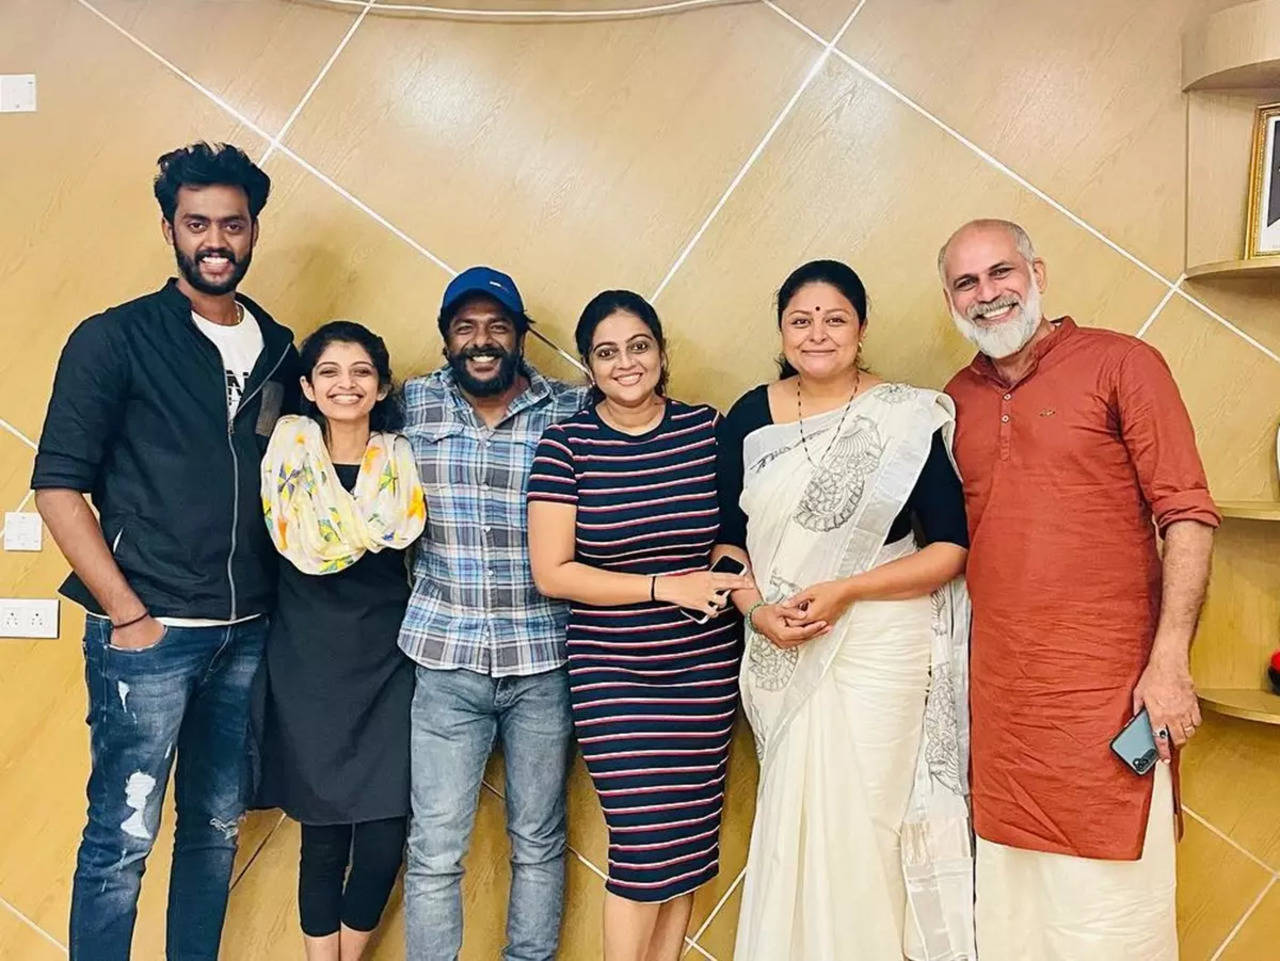 Chakkappazham to make a comeback? Actors Aswathy Sreekanth and Sabitta  share photos from reunion - Times of India